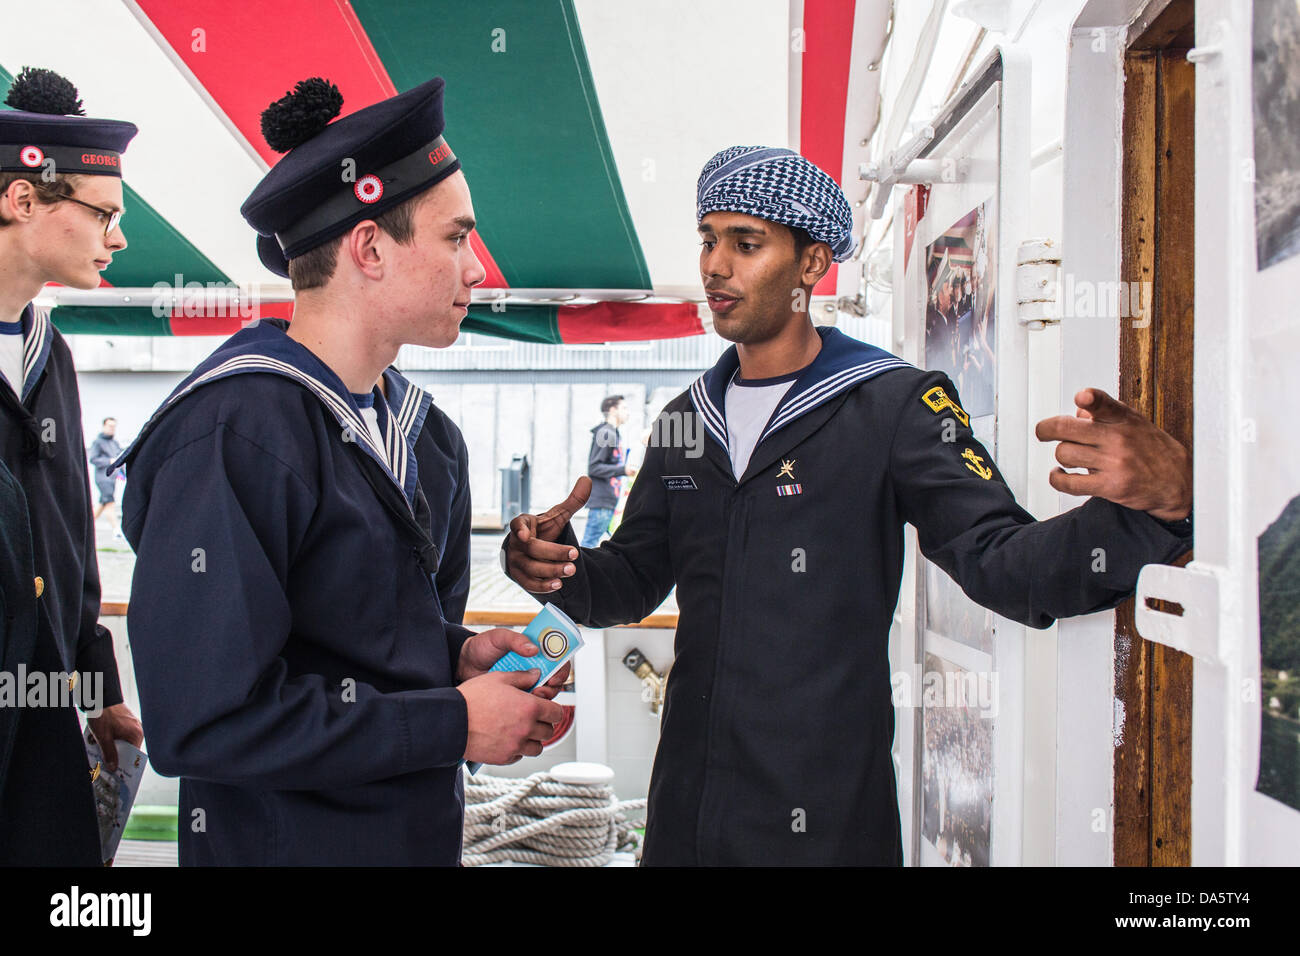 Aarhus, Denmark. 4th July, 2013. Crew member at The Royal Navy of Oman vessel Shabab Oman, introducing the ship to crew members of the Danish vessel Georg Stage, during The Tall Ships Races 2013 in Aarhus, Denmark. The city of Aarhus in Denmark, is the starting point of this years Tall Ships Races. The event includes a fleet of 104 sailing vessels and 3000 crew members from all over the world. Credit:  Michael Harder/Alamy Live News Stock Photo